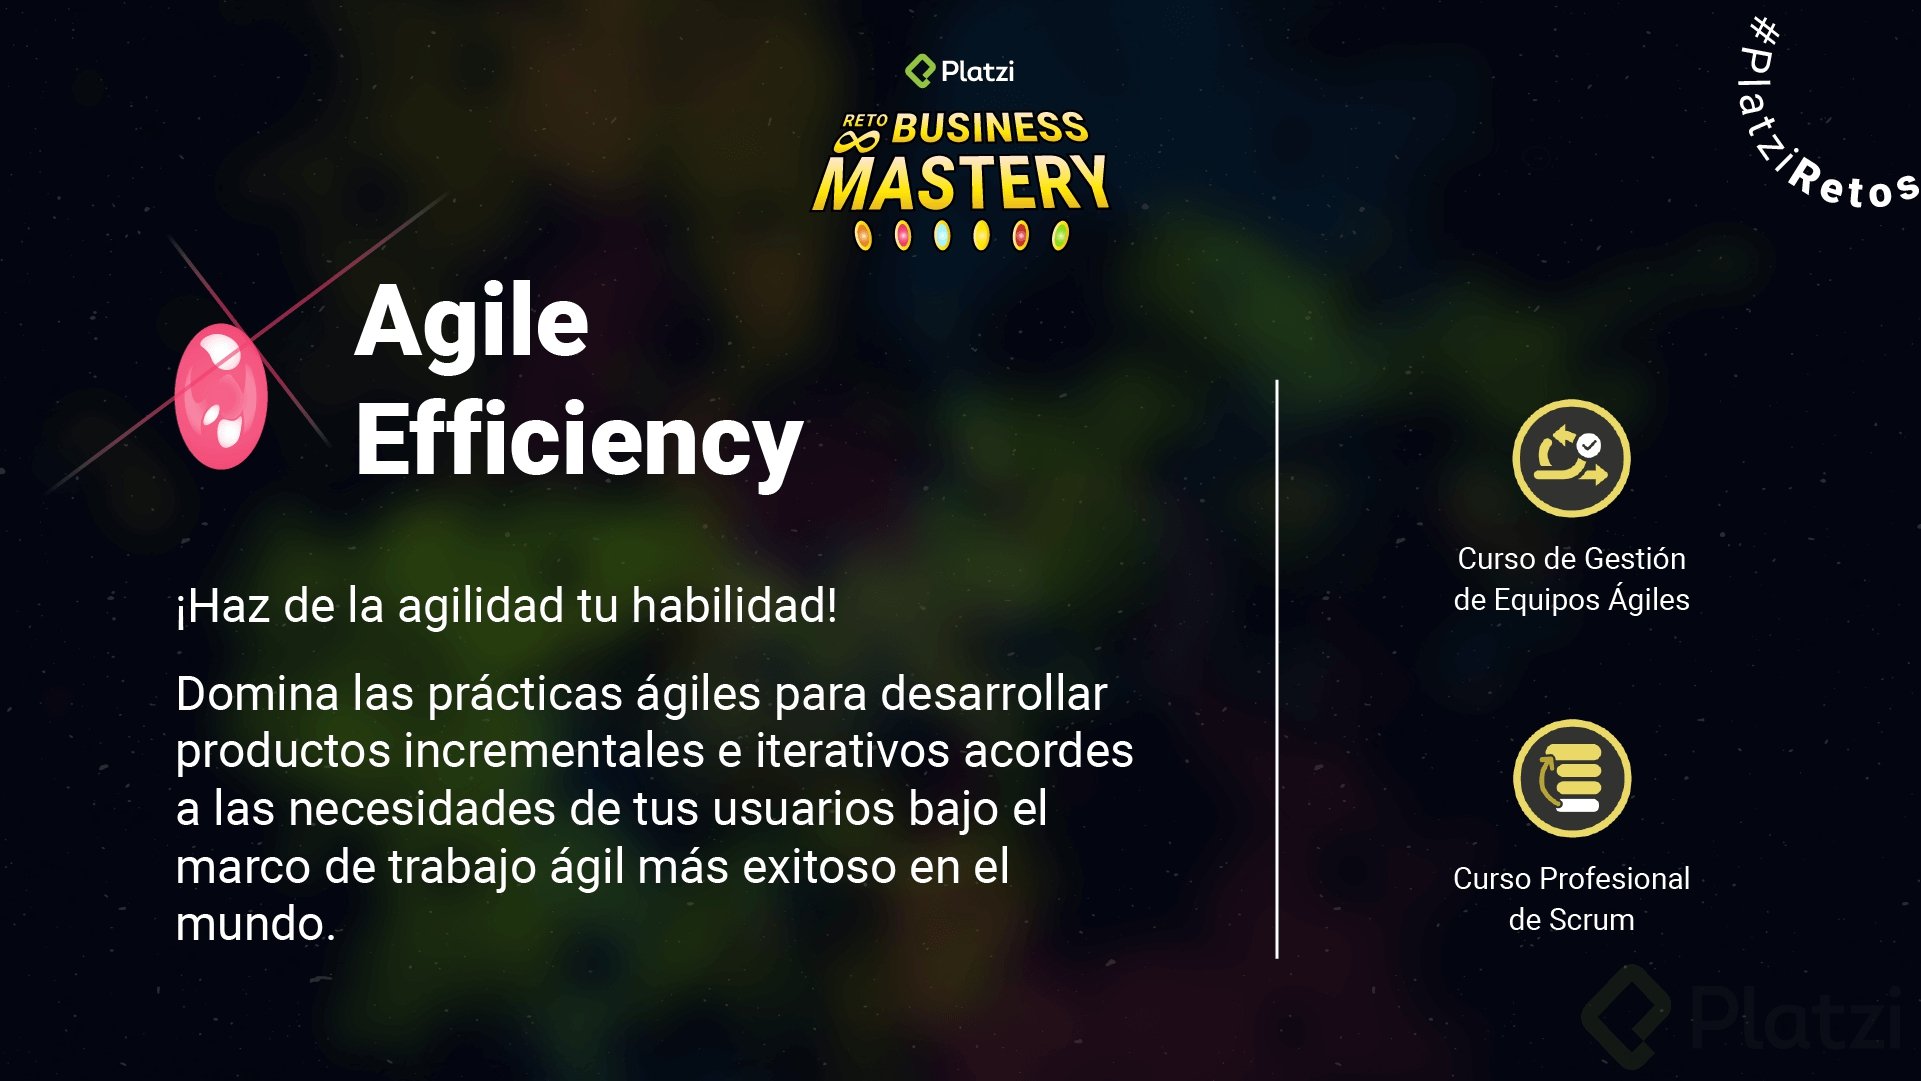 reto-business-mastery_16-9-agile-efficiency.png